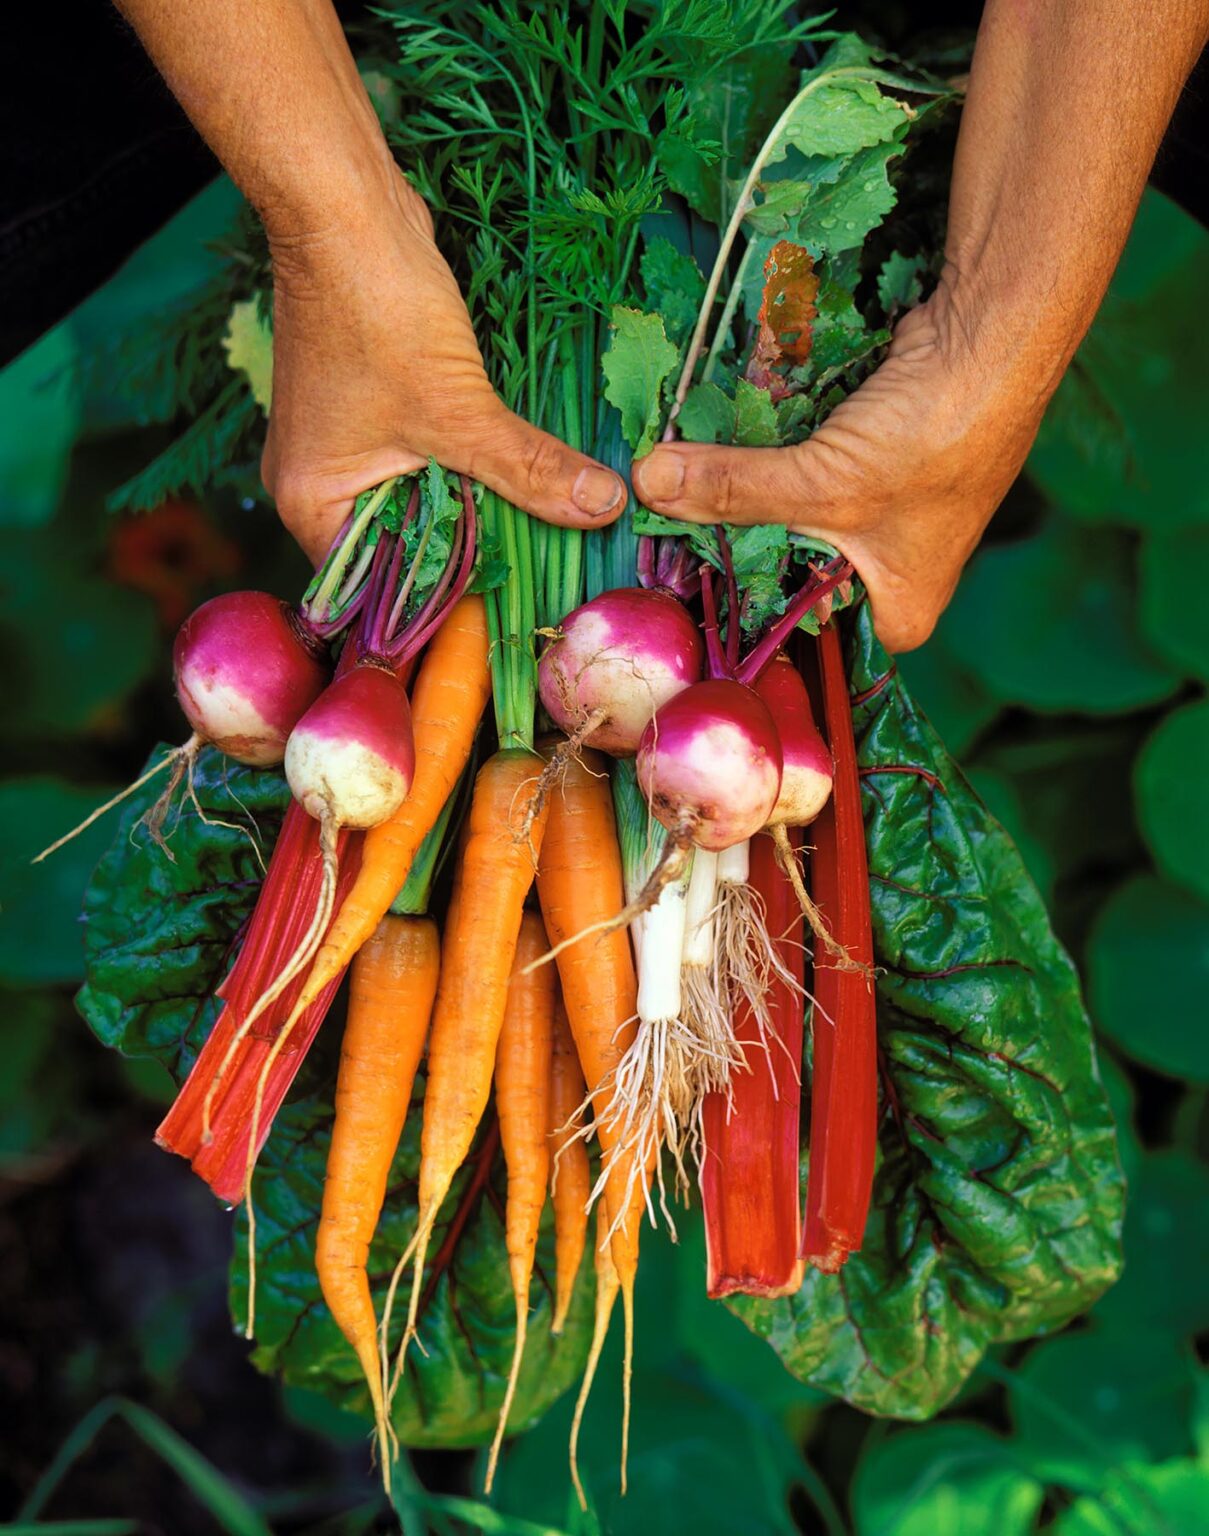 Hands holding a bouquet of fresh picked CARROTS, RADISHES, RED CHARD and SCALLIONS